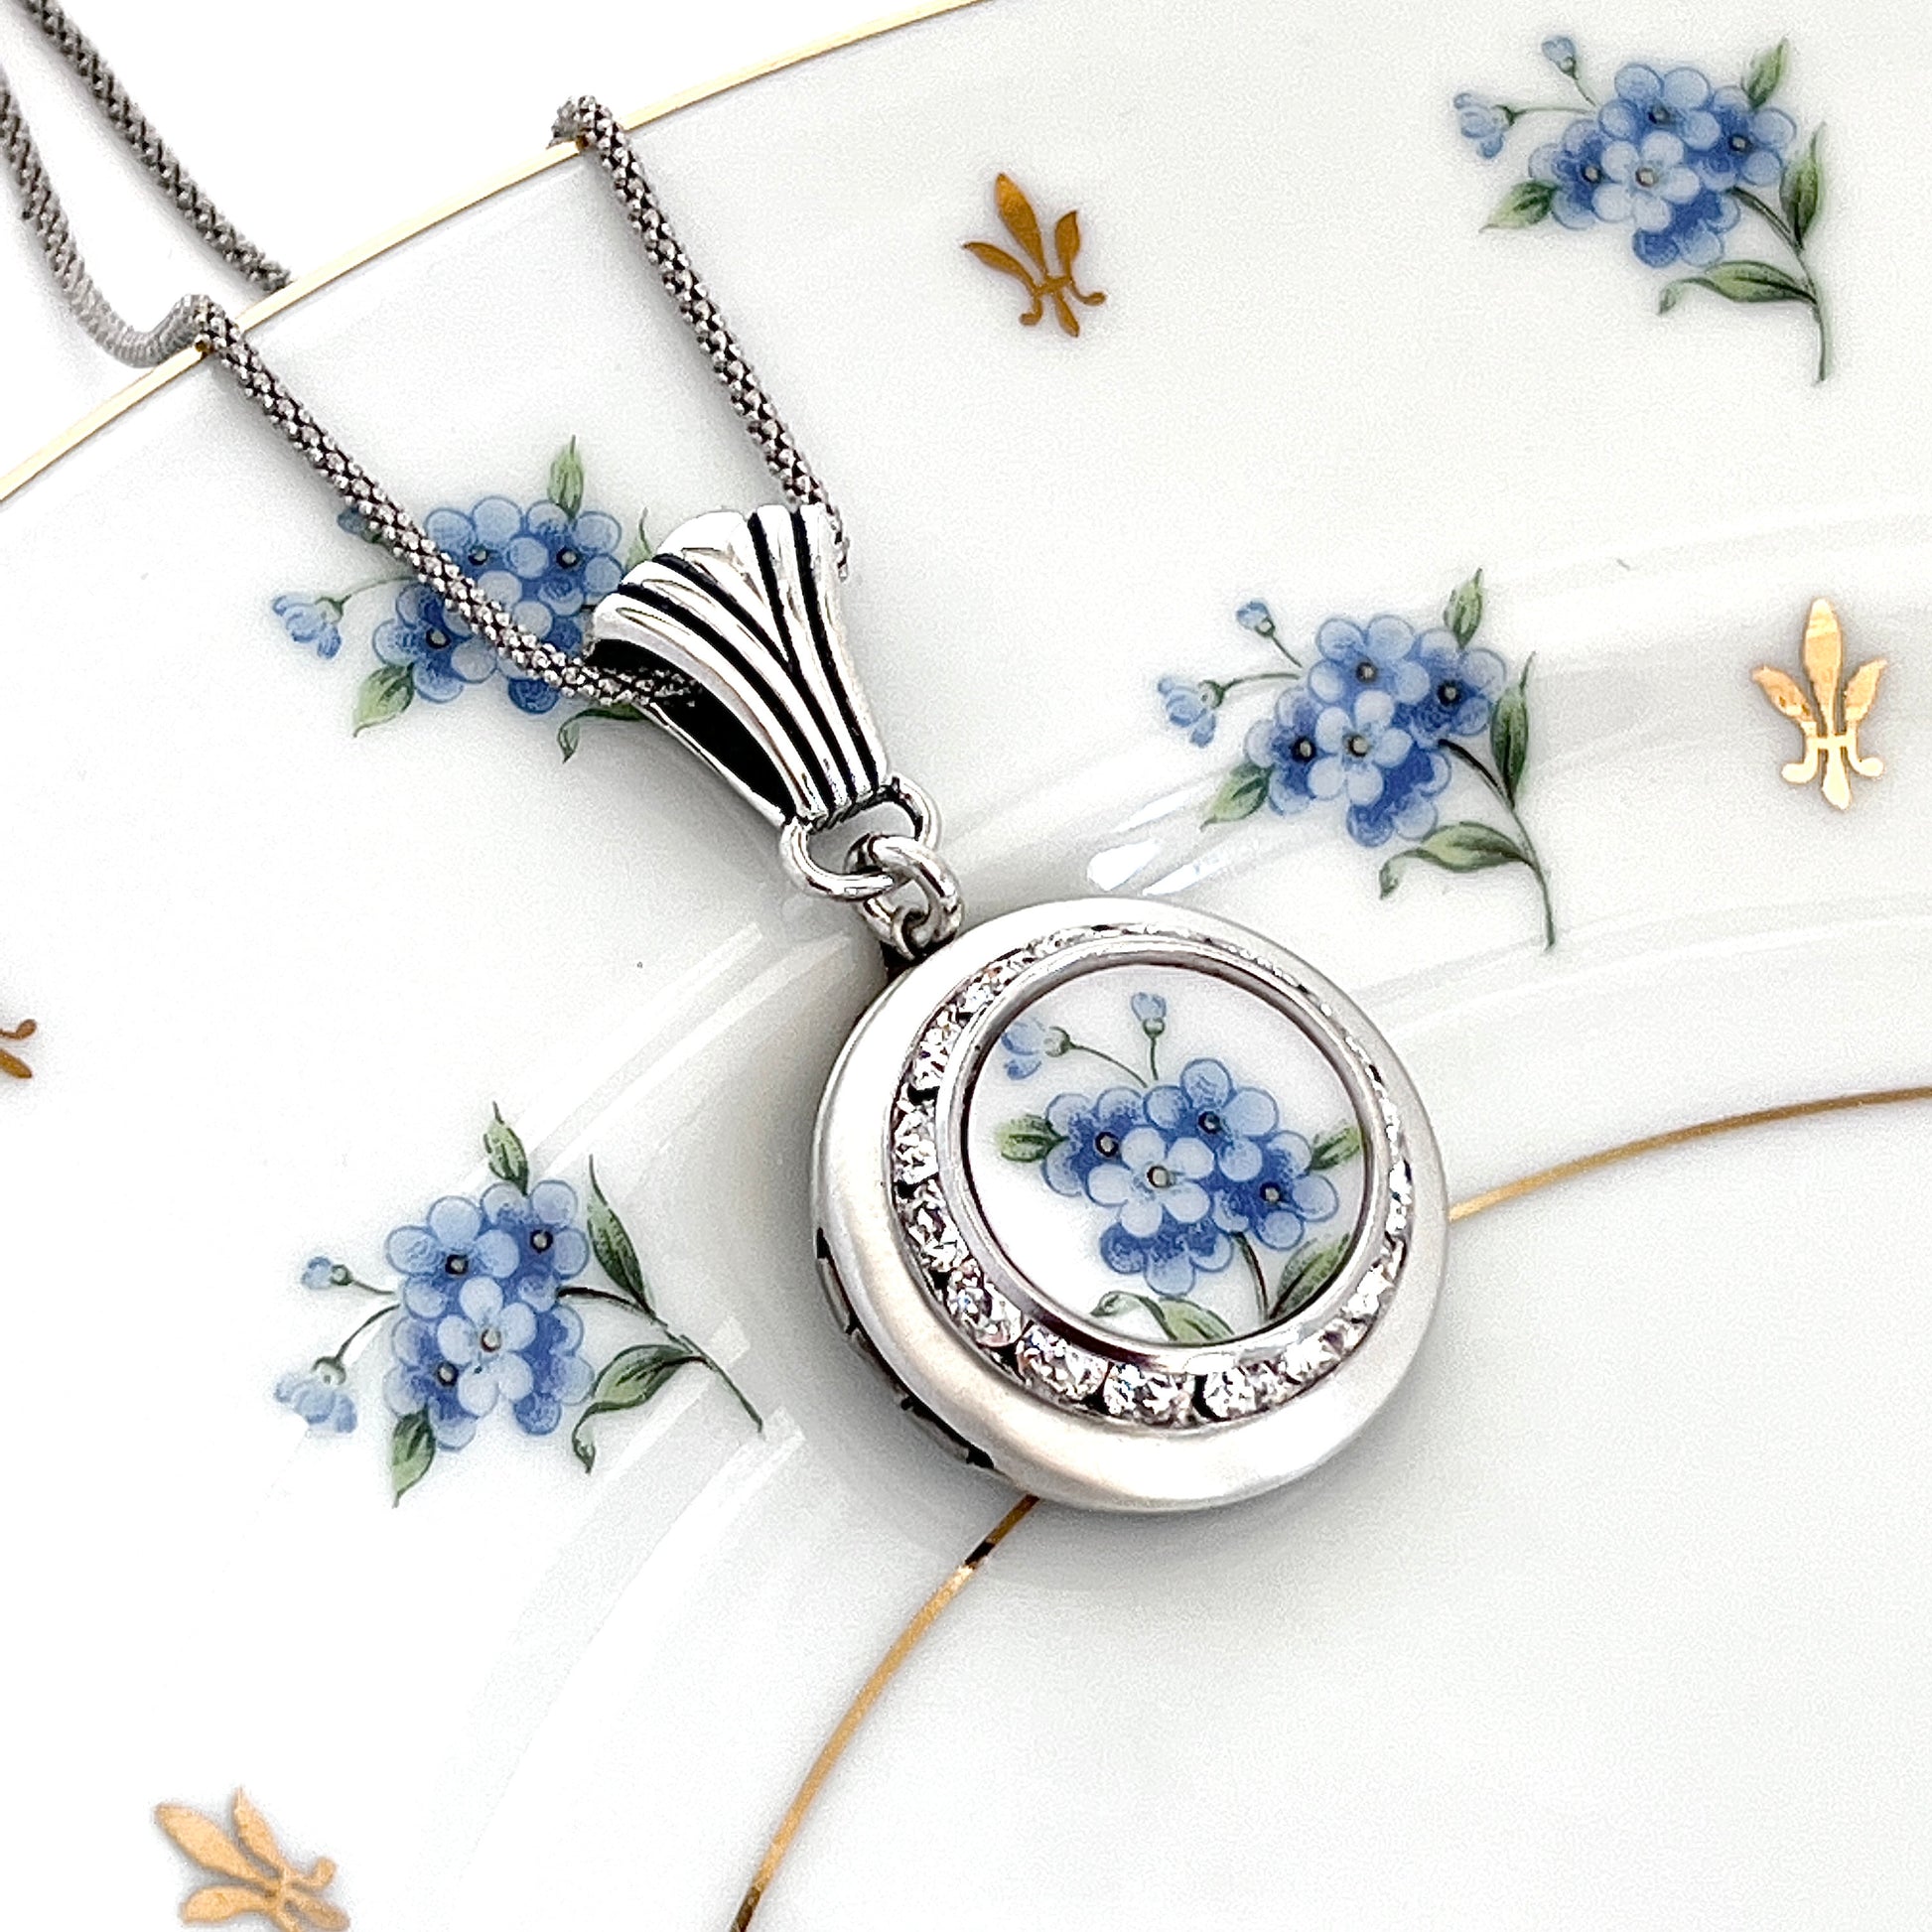 CUSTOM ORDER China Locket Necklace, Remembrance Gift, Unique Gifts for Mom/Sister/Grandmother, Broken China Jewelry, Custom Jewelry